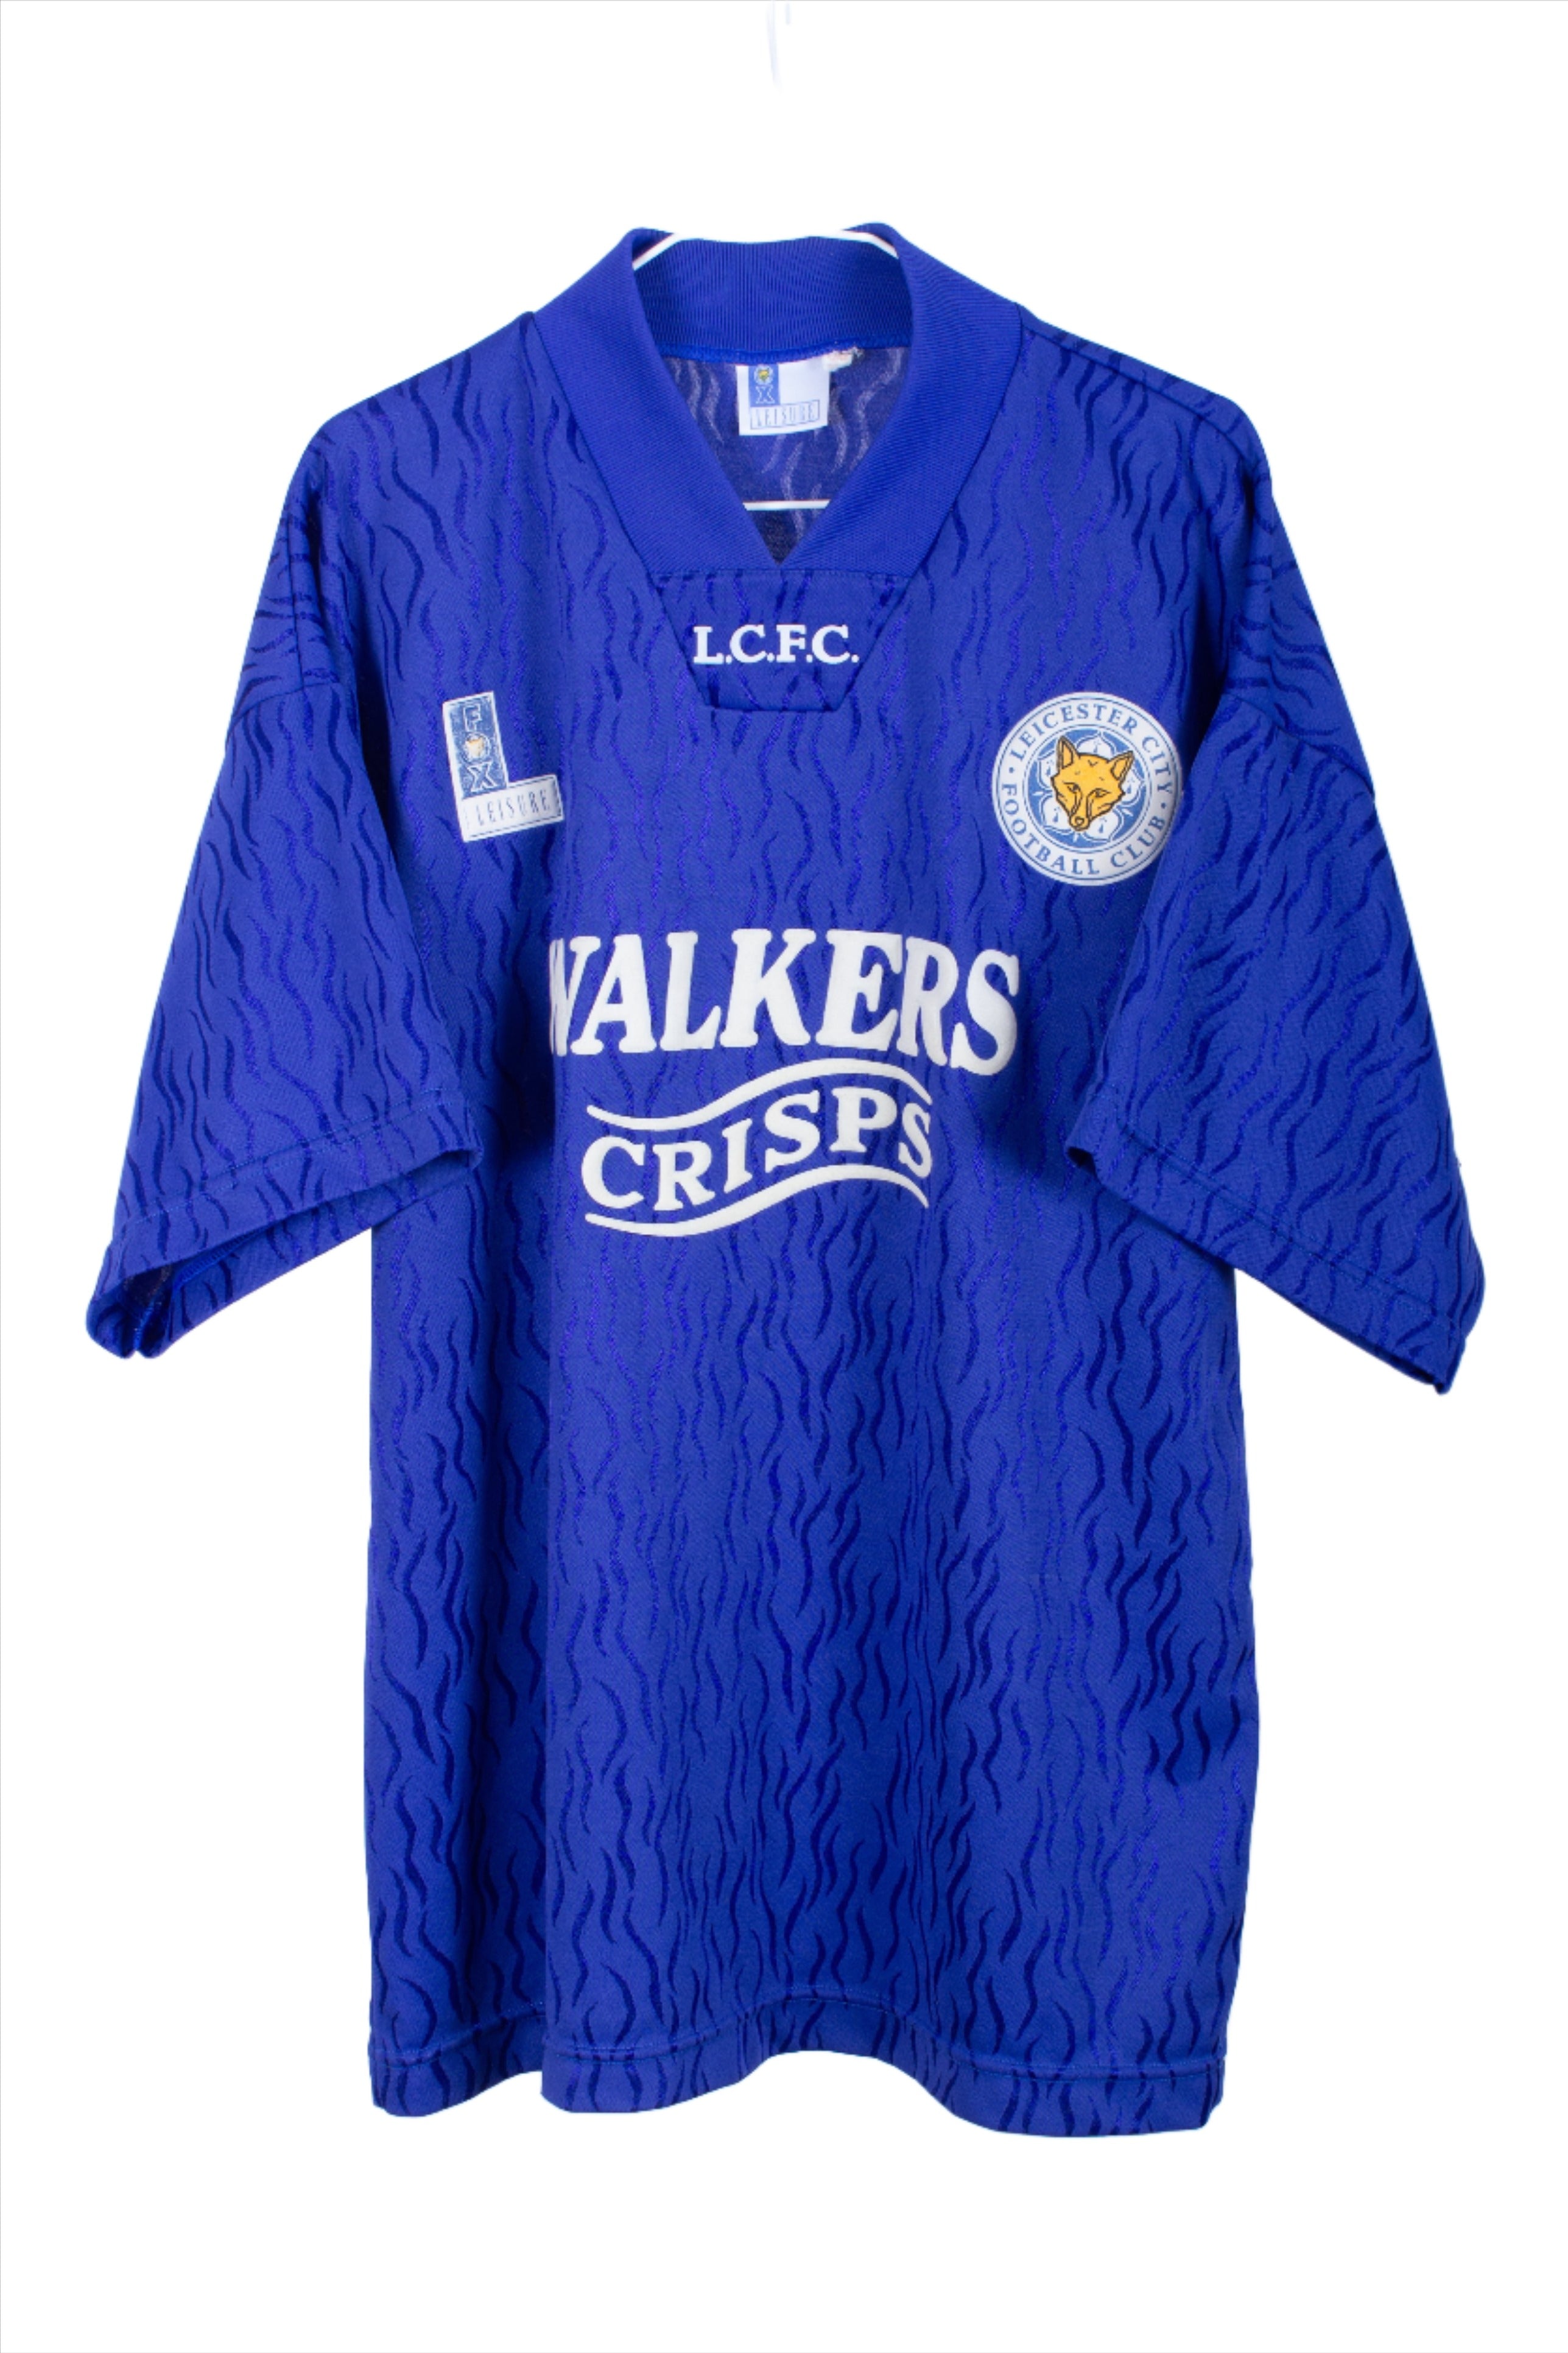 Classic Leicester City Football Shirt, Classic English Football Shirts, Vintage Leicester Shirts